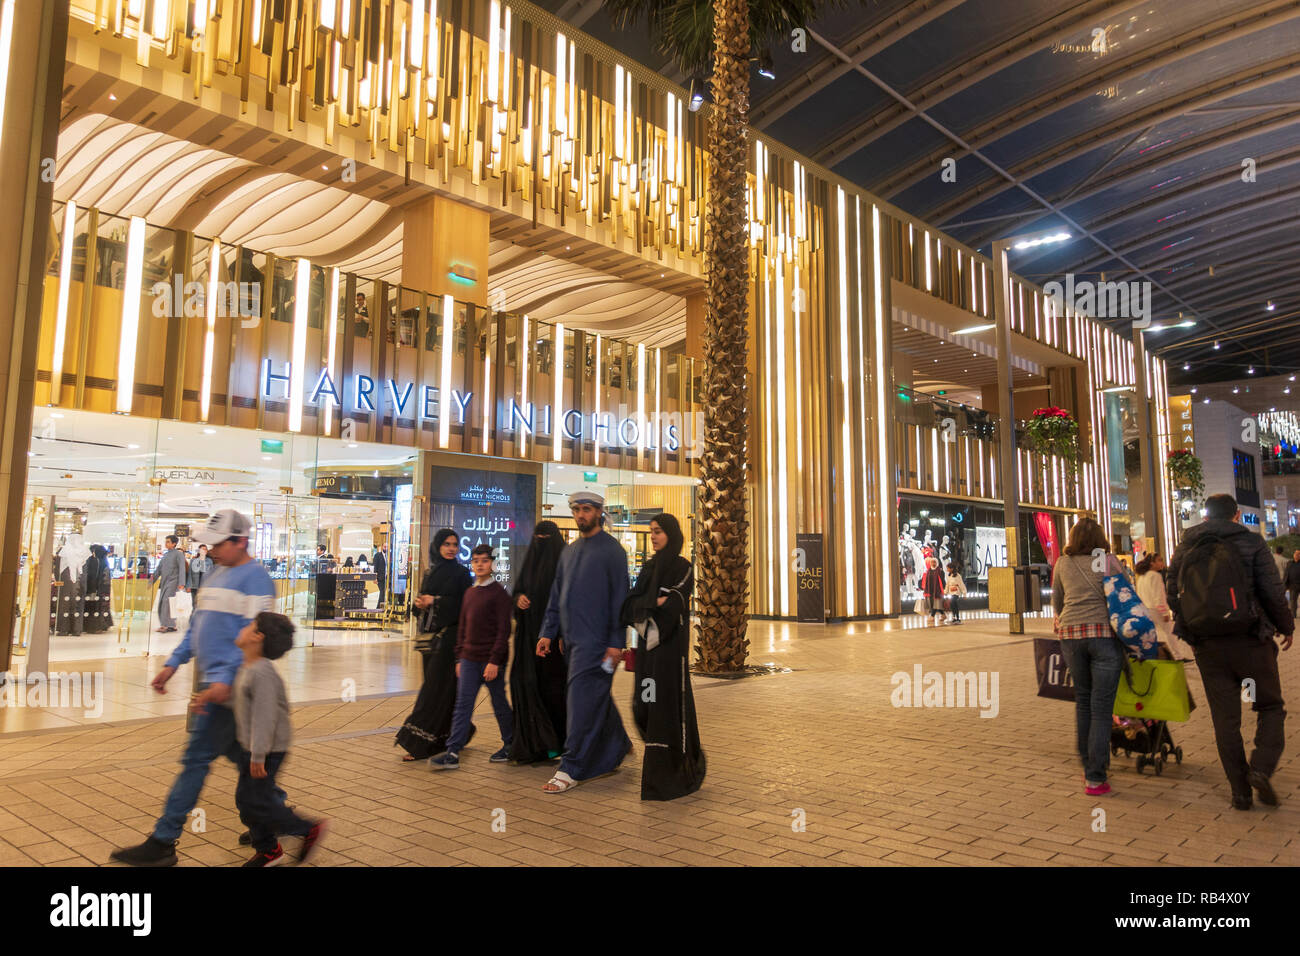 Interior of The Avenues shopping mall in Kuwait City, Kuwait Stock Photo